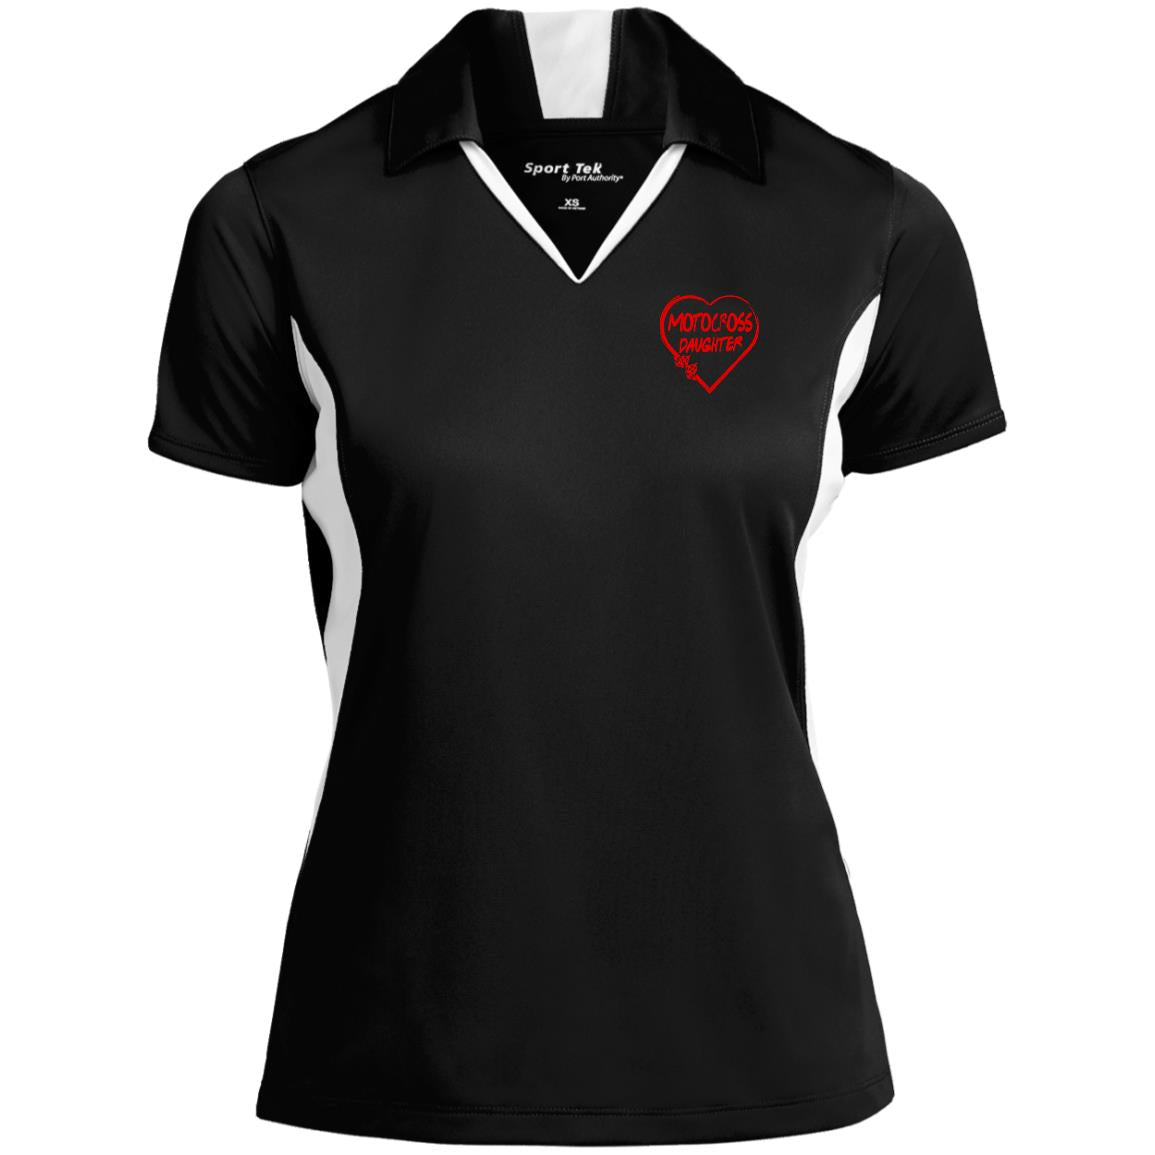 Motocross Daughter Heart Ladies' Colorblock Performance Polo